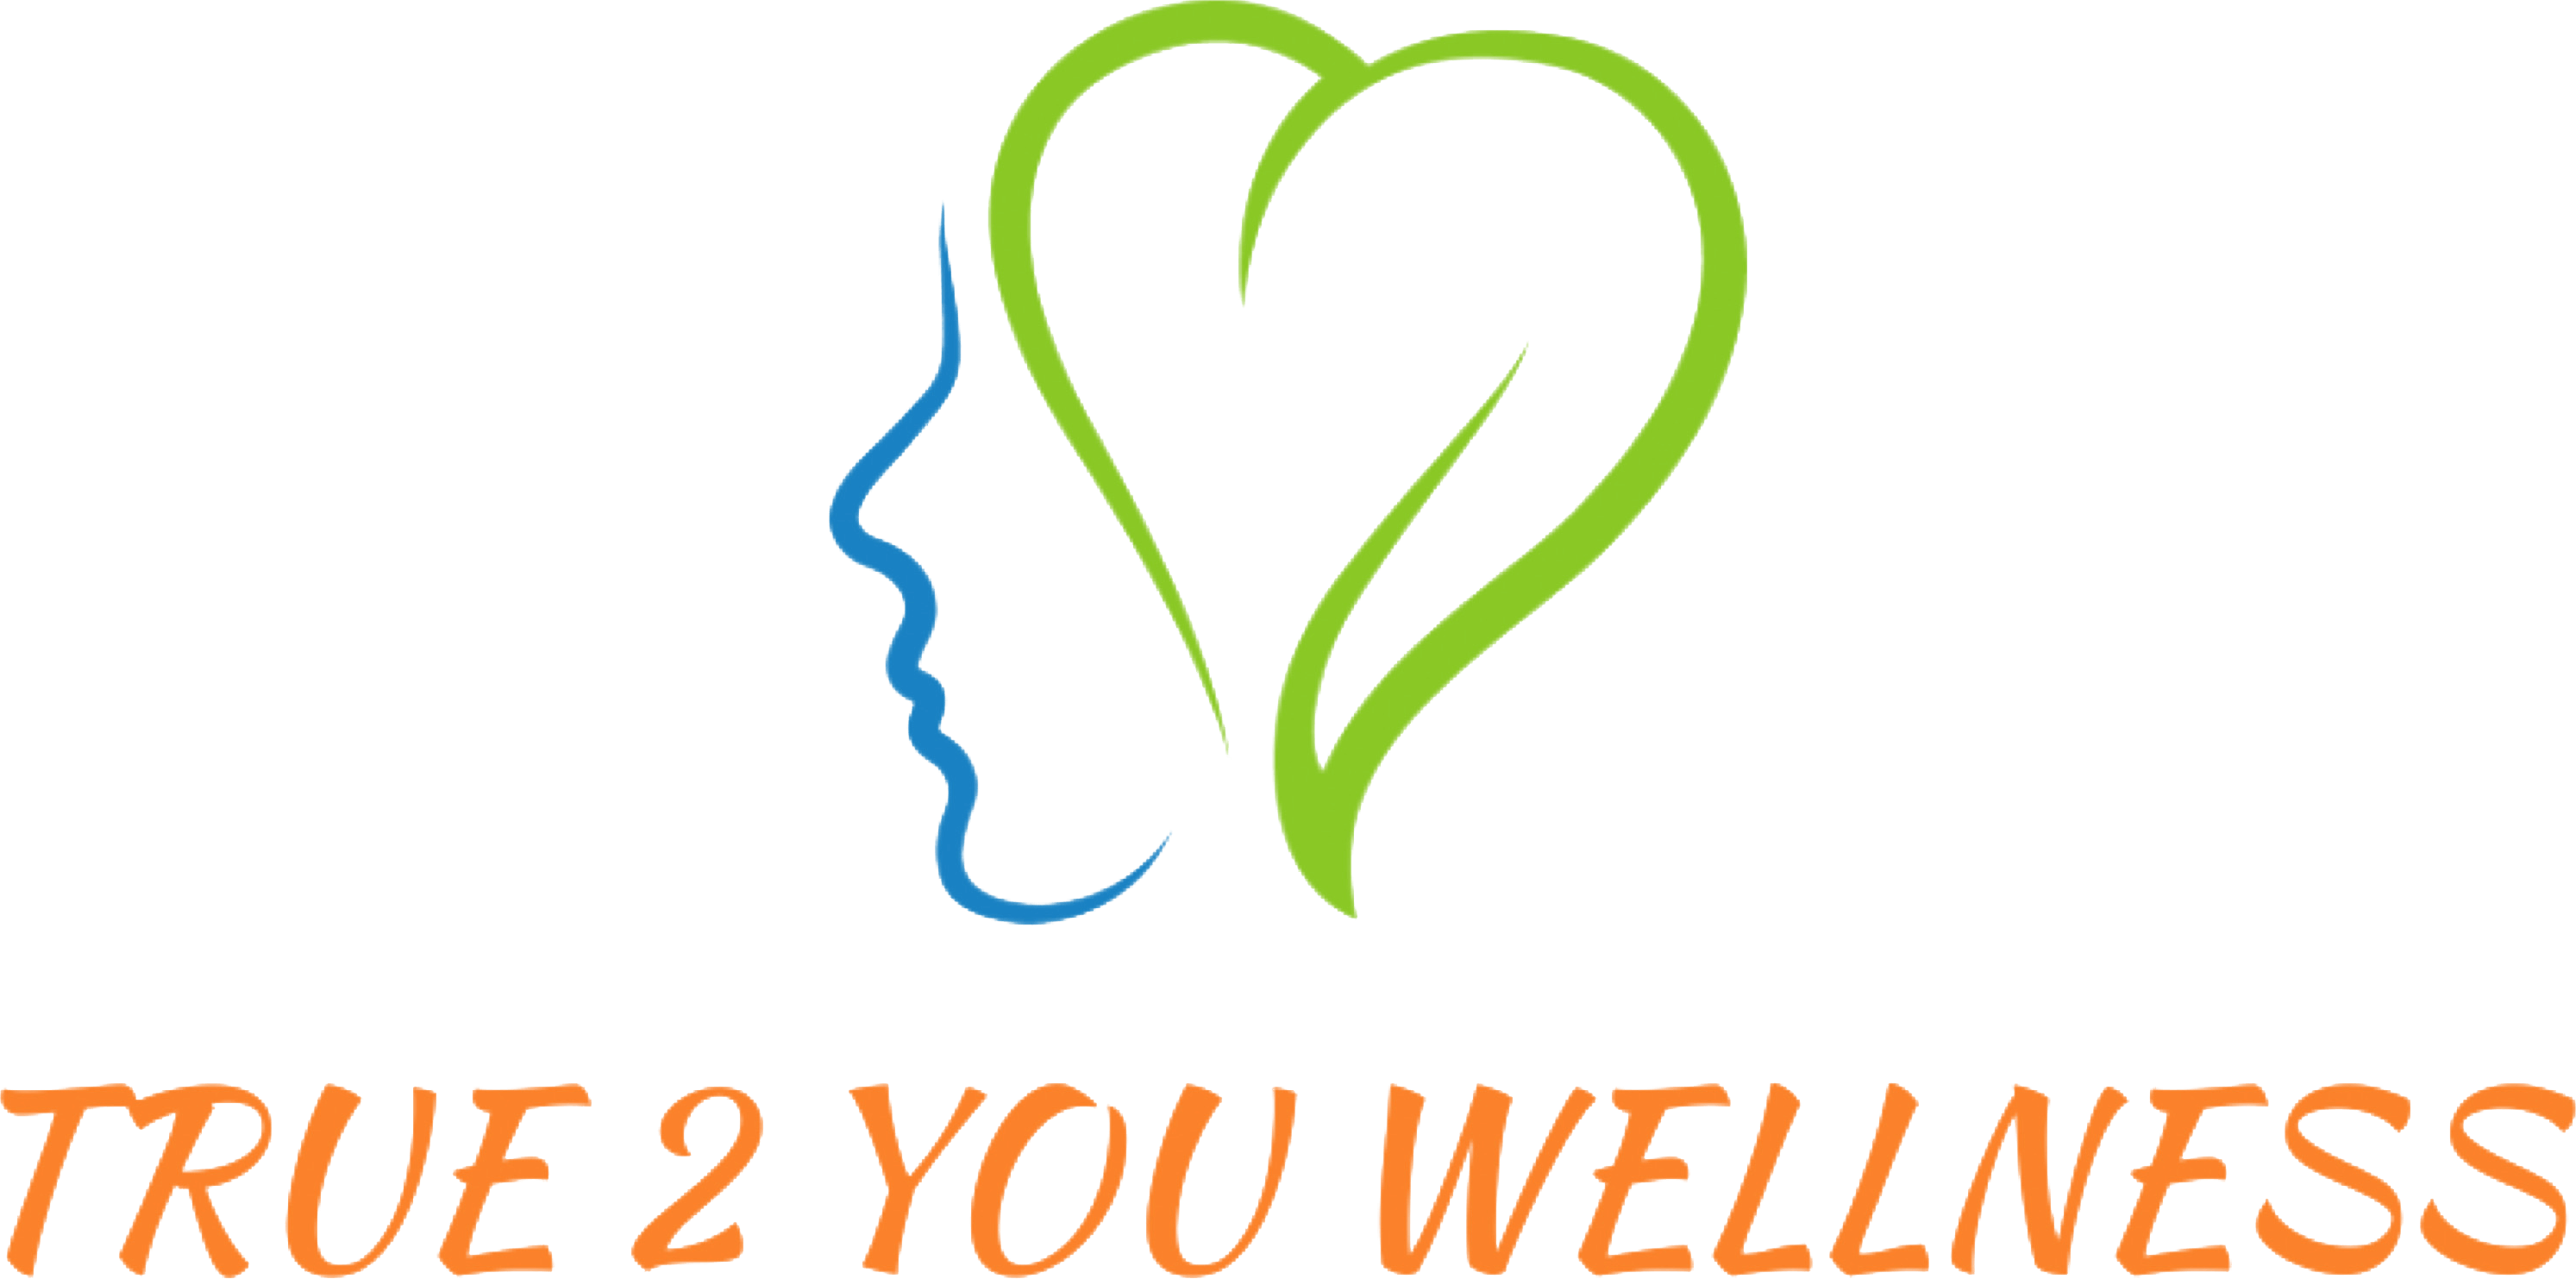 A picture of the logo for 2 you well.